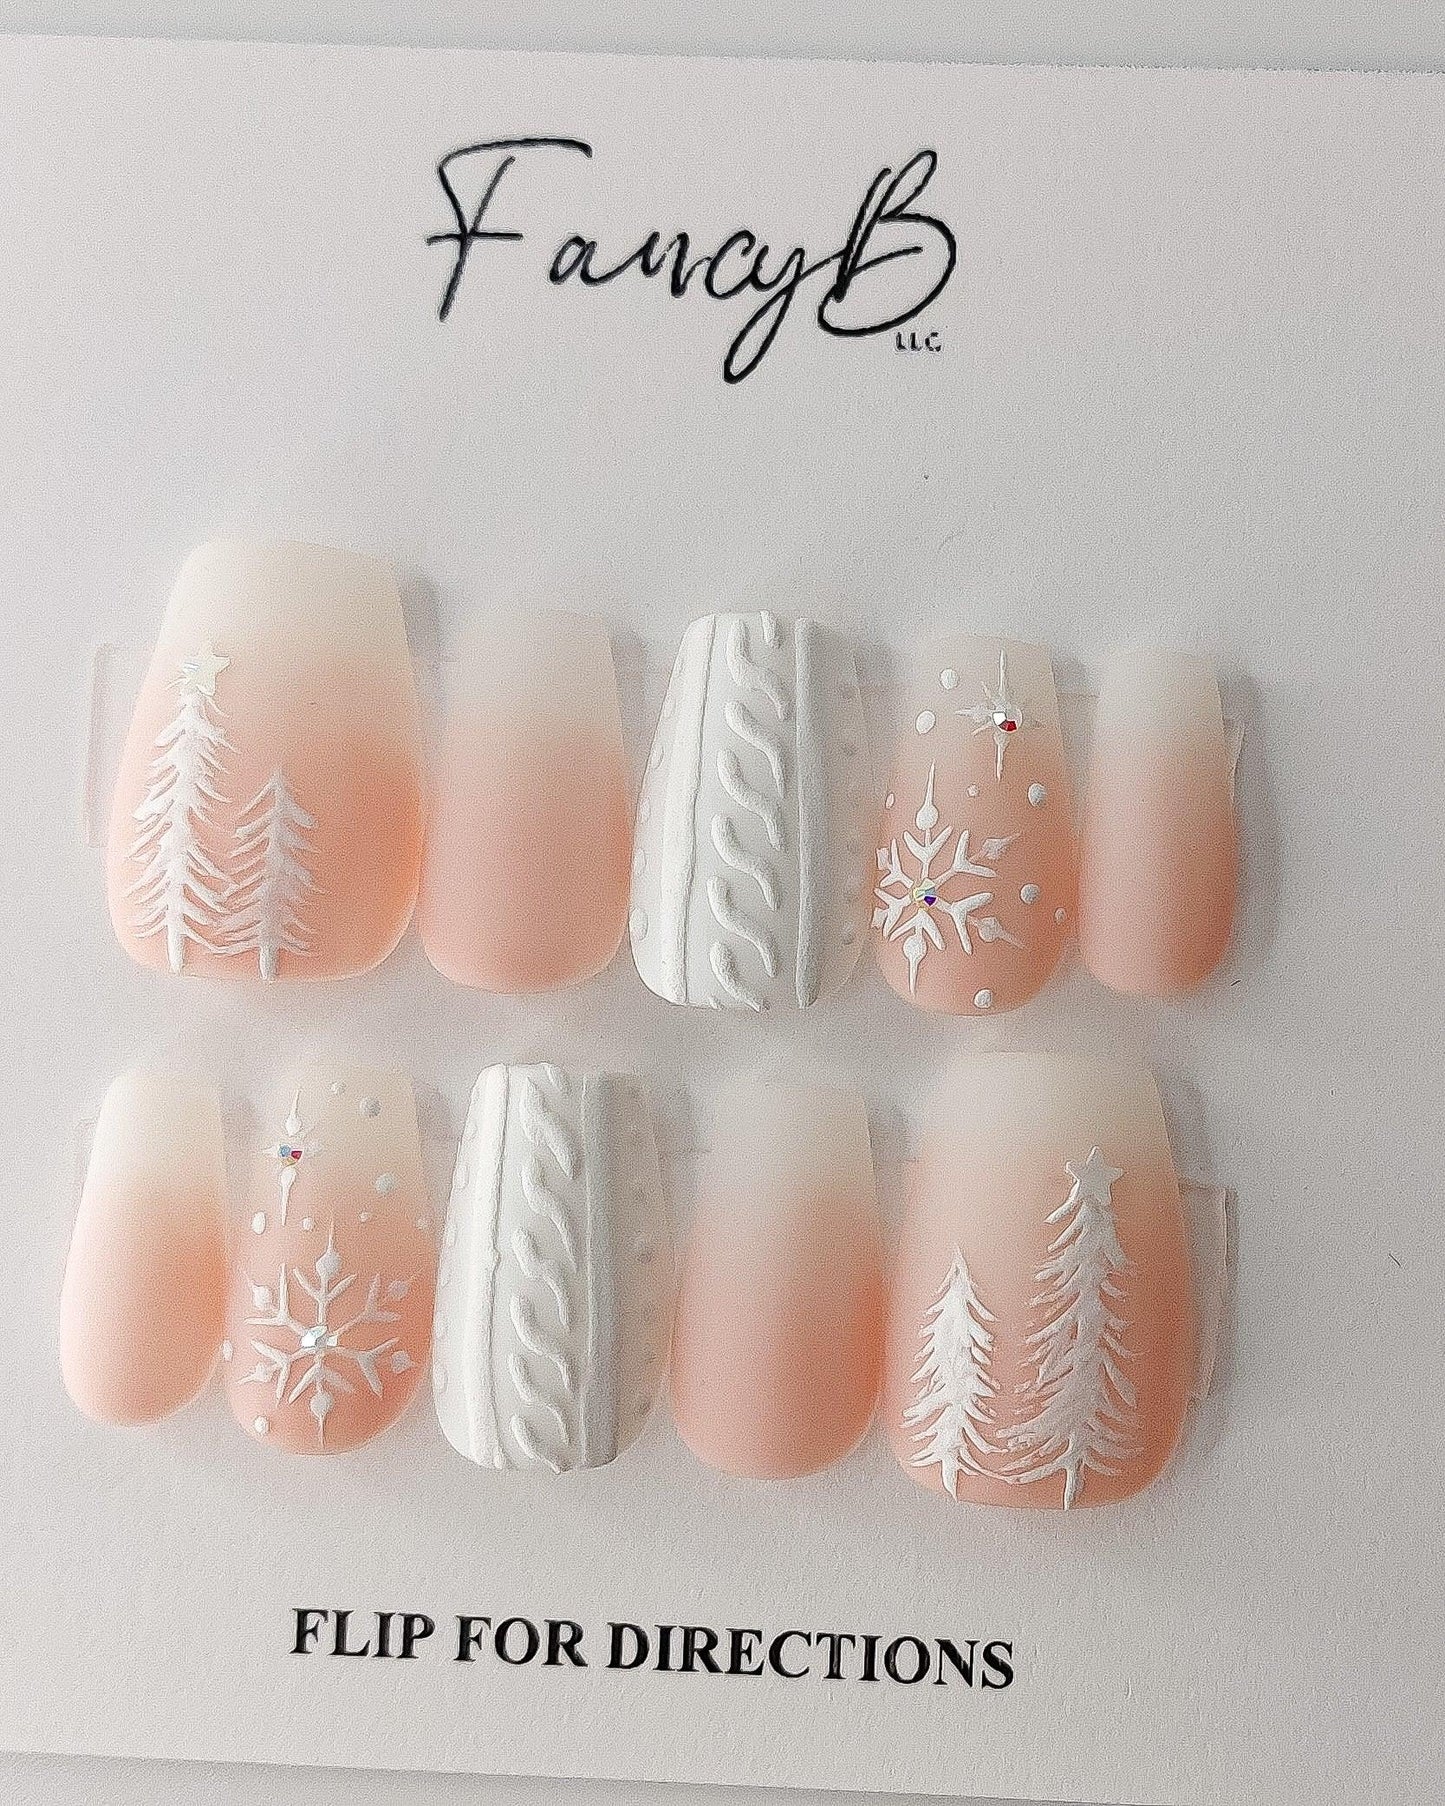 Pink Snowmbré Press on Nails | Crystal Snowflakes with Pink to White Ombré in Matte Finish - FancyB Press-on Nails